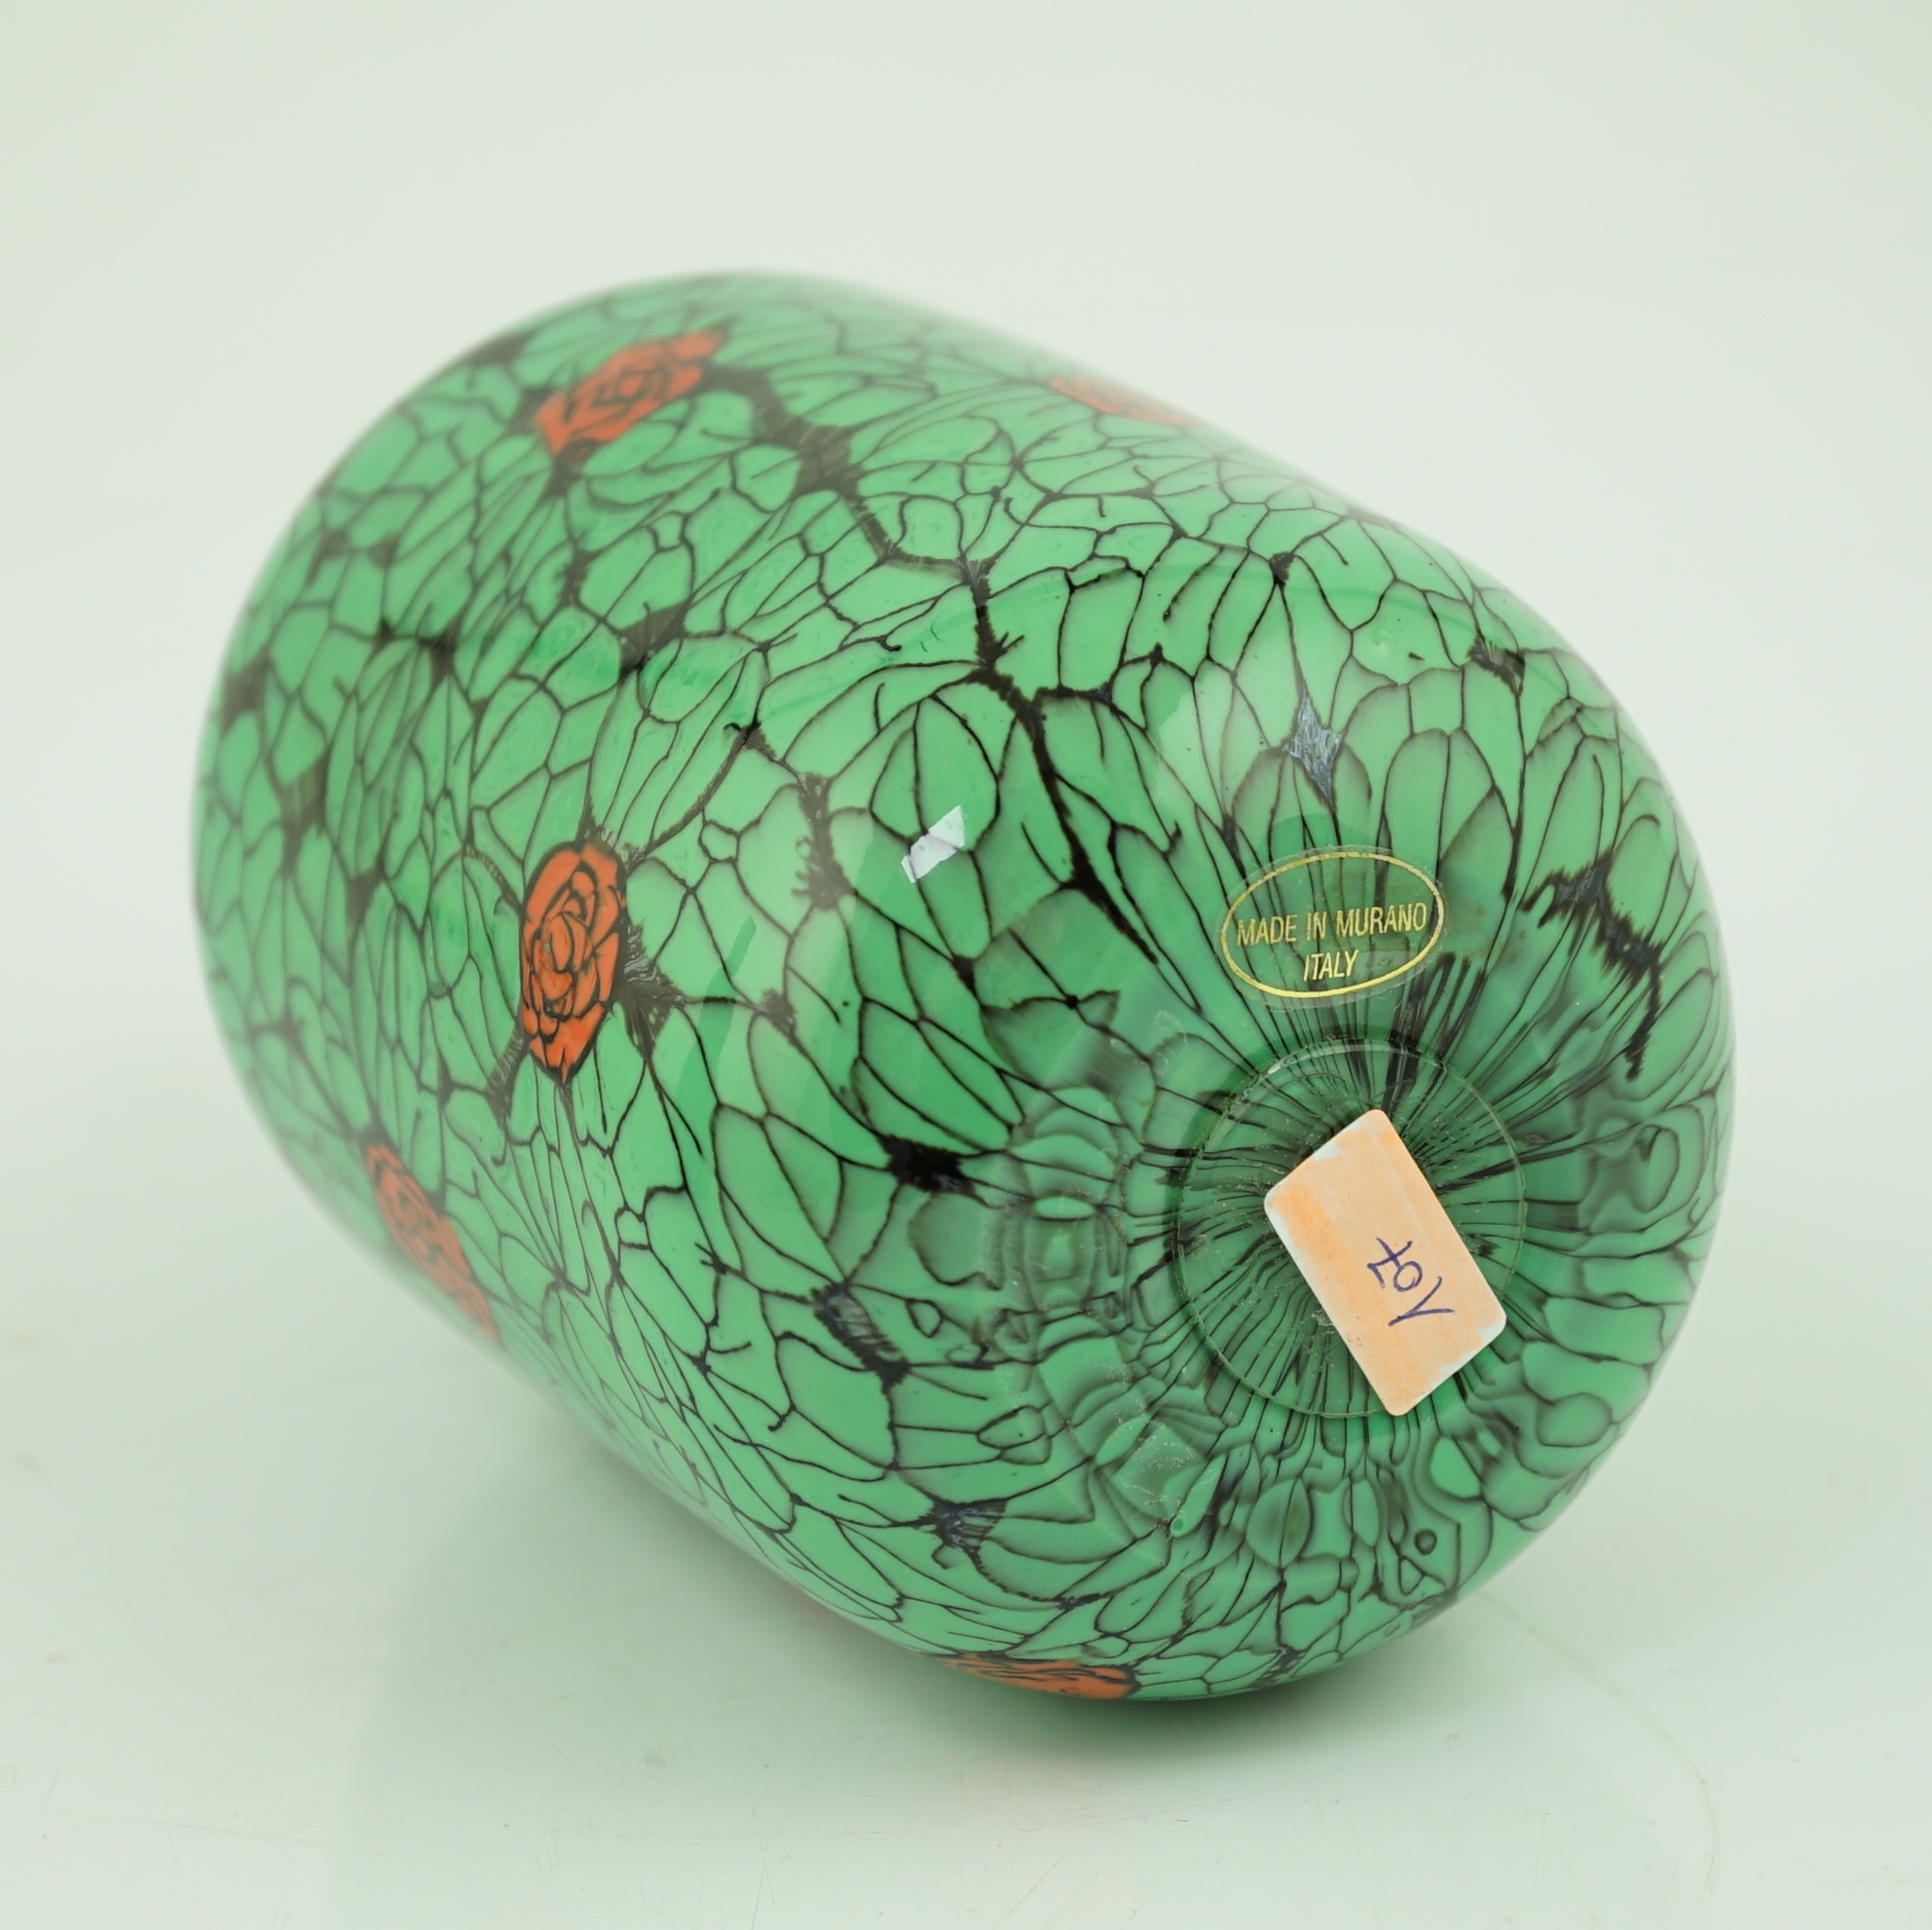 Vittorio Ferro (1932-2012) A Murano glass Murrine vase, with green leaves and red rose buds, signed, 19cms, Please note this lot attracts an additional import tax of 20% on the hammer price